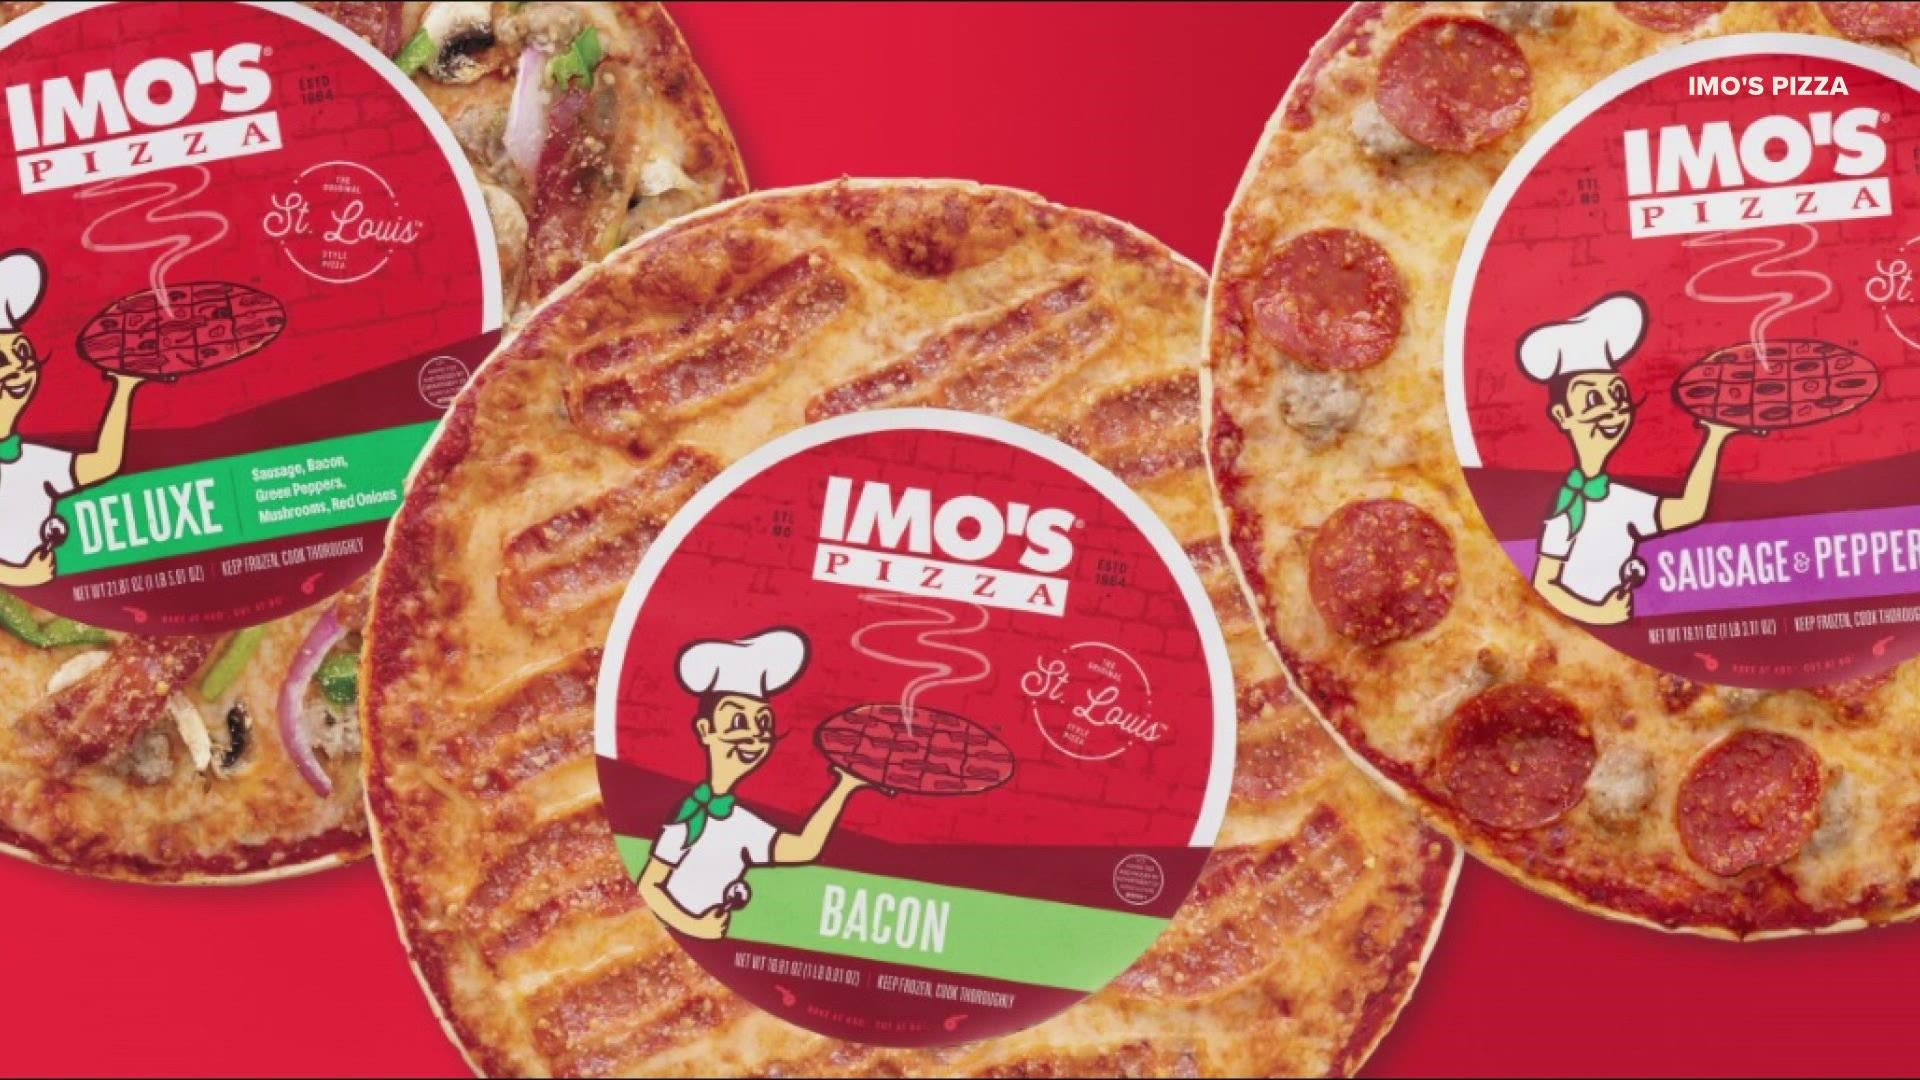 The family-owned company announced the launch of Imo’s frozen, St. Louis-styled pizzas in town and 13 other states. The pizzas will be available by Oct. 3.